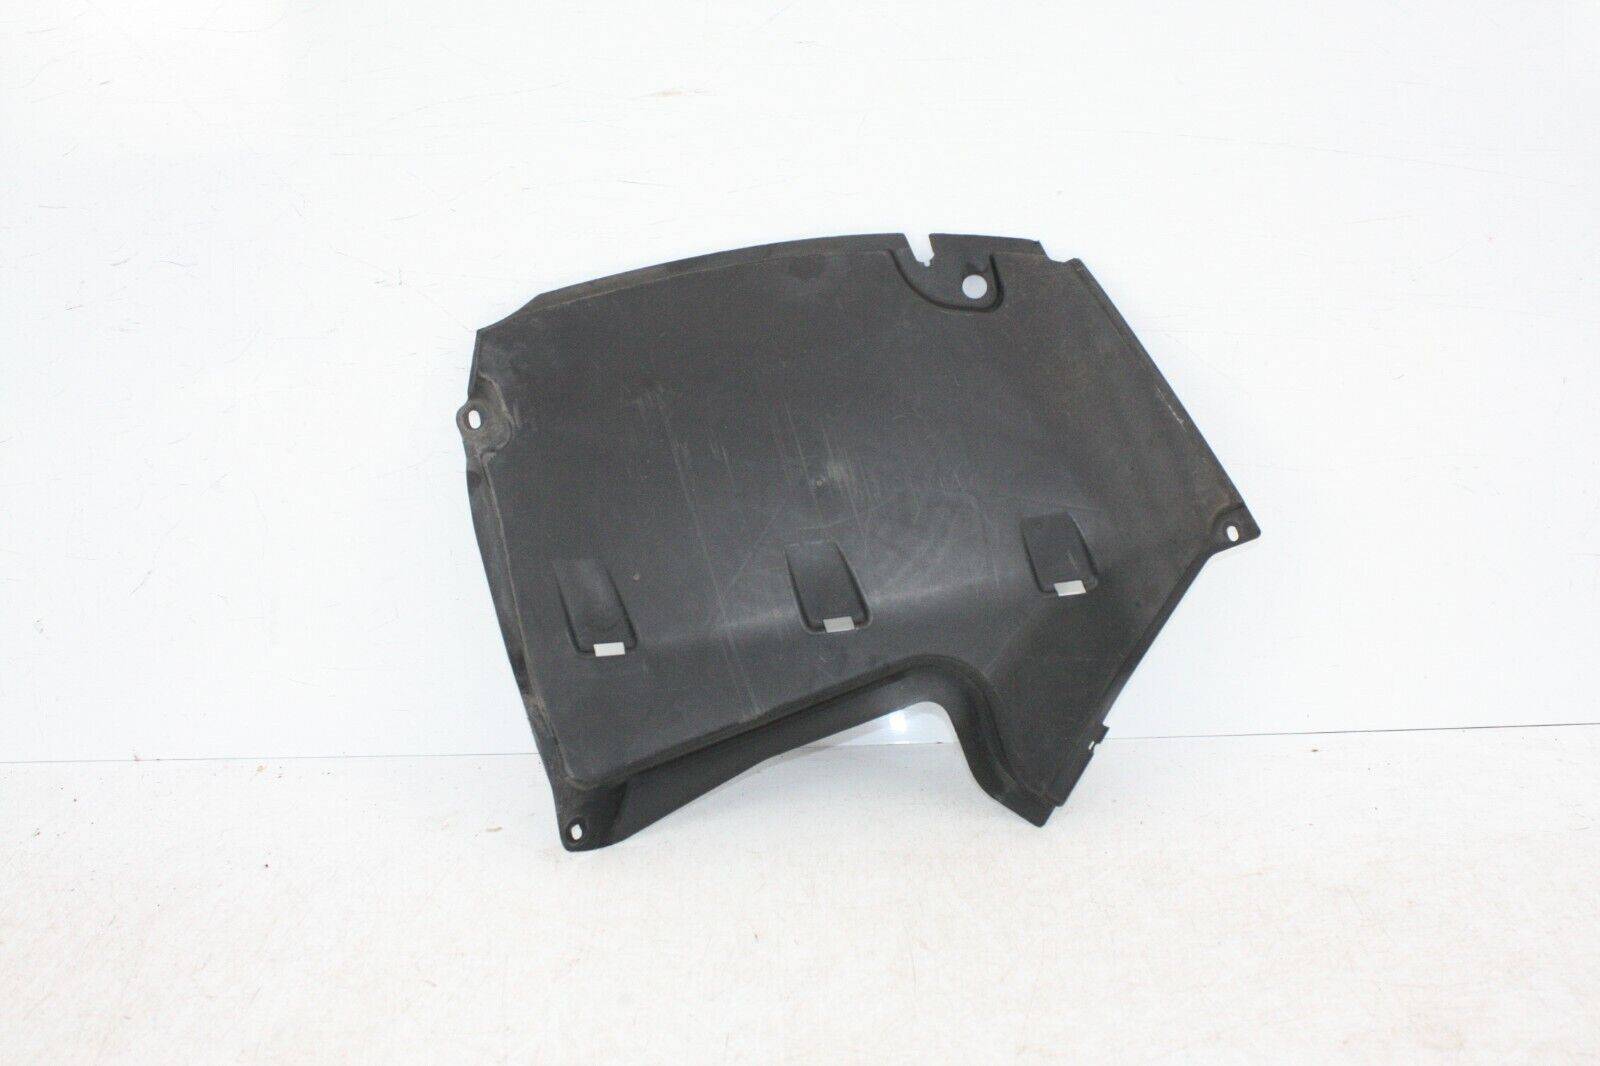 Audi-A4-Rear-Right-Underbody-Tray-Cover-2015-TO-2018-8W0825219A-175367535392